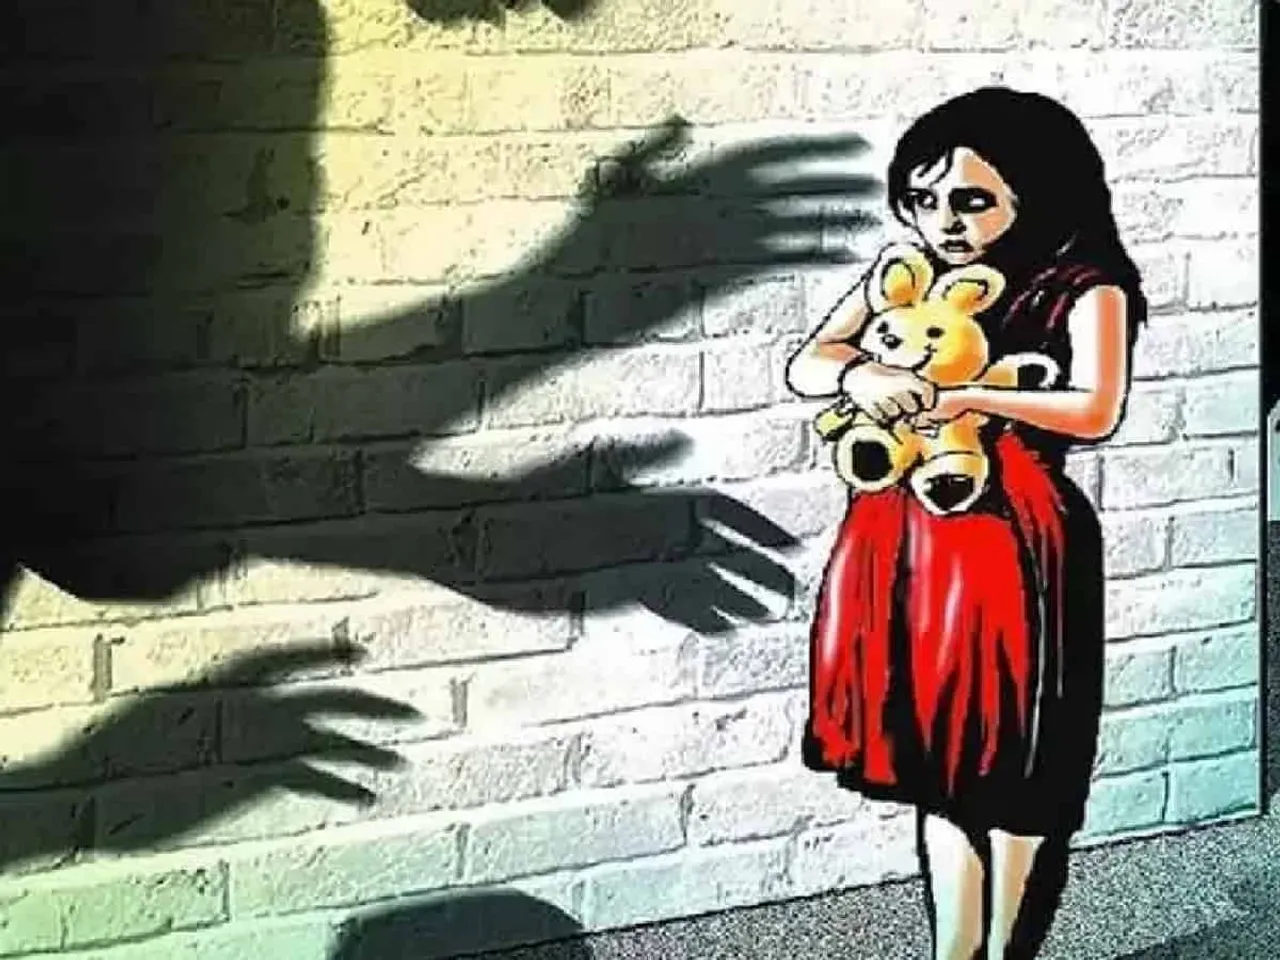 Not advisable to tinker with existing age of consent under POCSO Act: Law Commission to govt